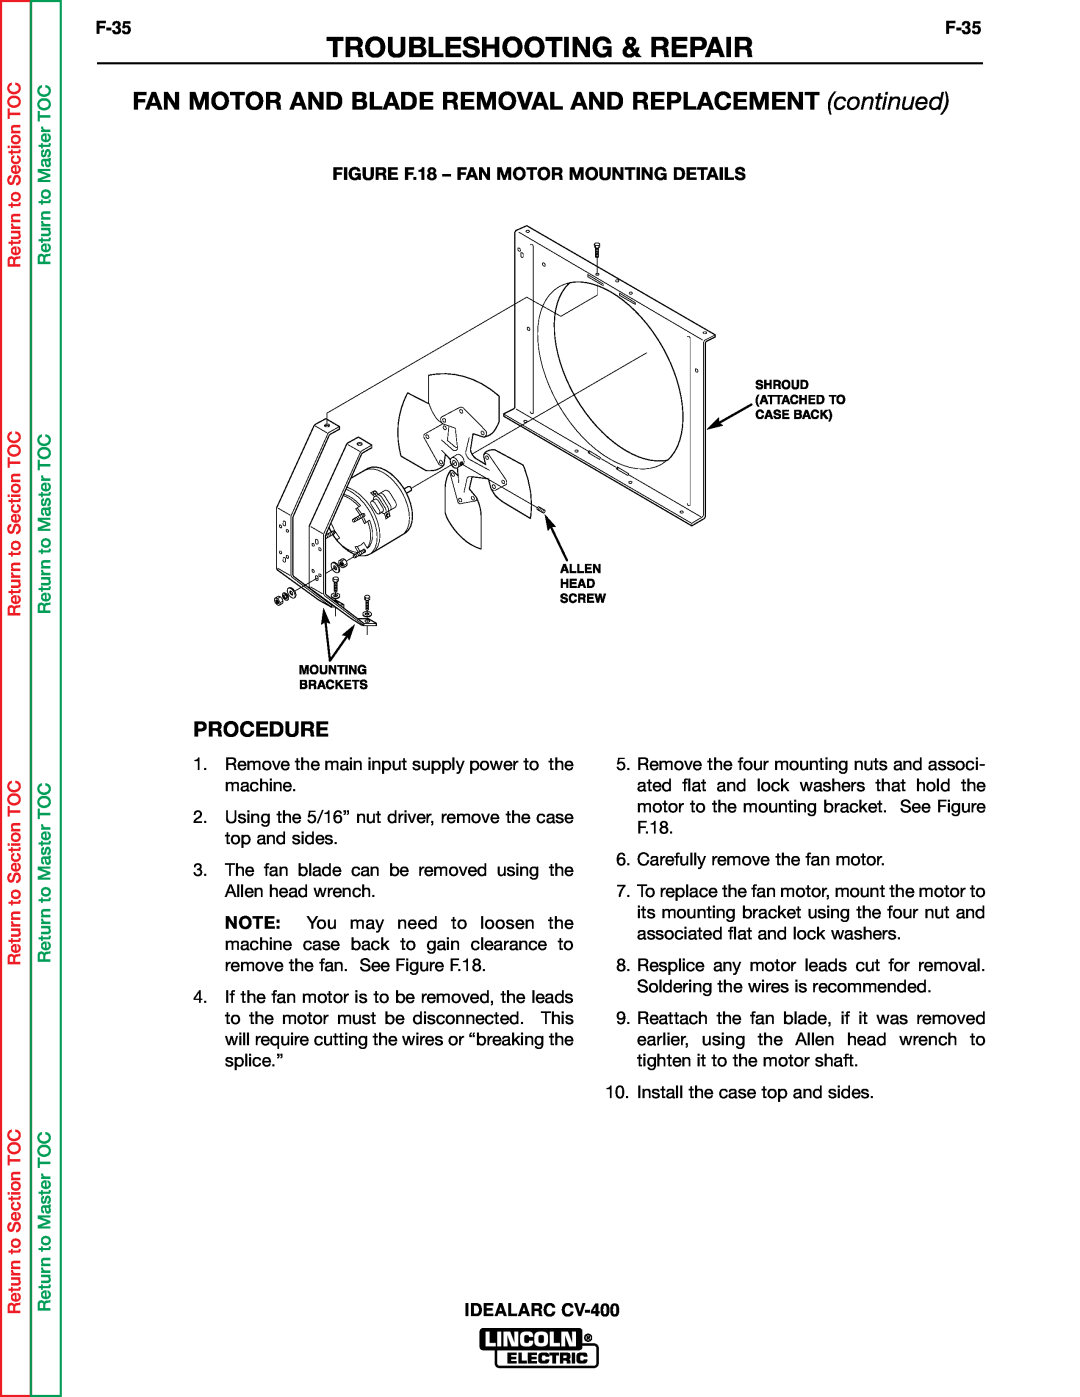 Lincoln Electric SVM136-A service manual FAN MOTOR AND BLADE REMOVAL AND REPLACEMENT continued, Troubleshooting & Repair 